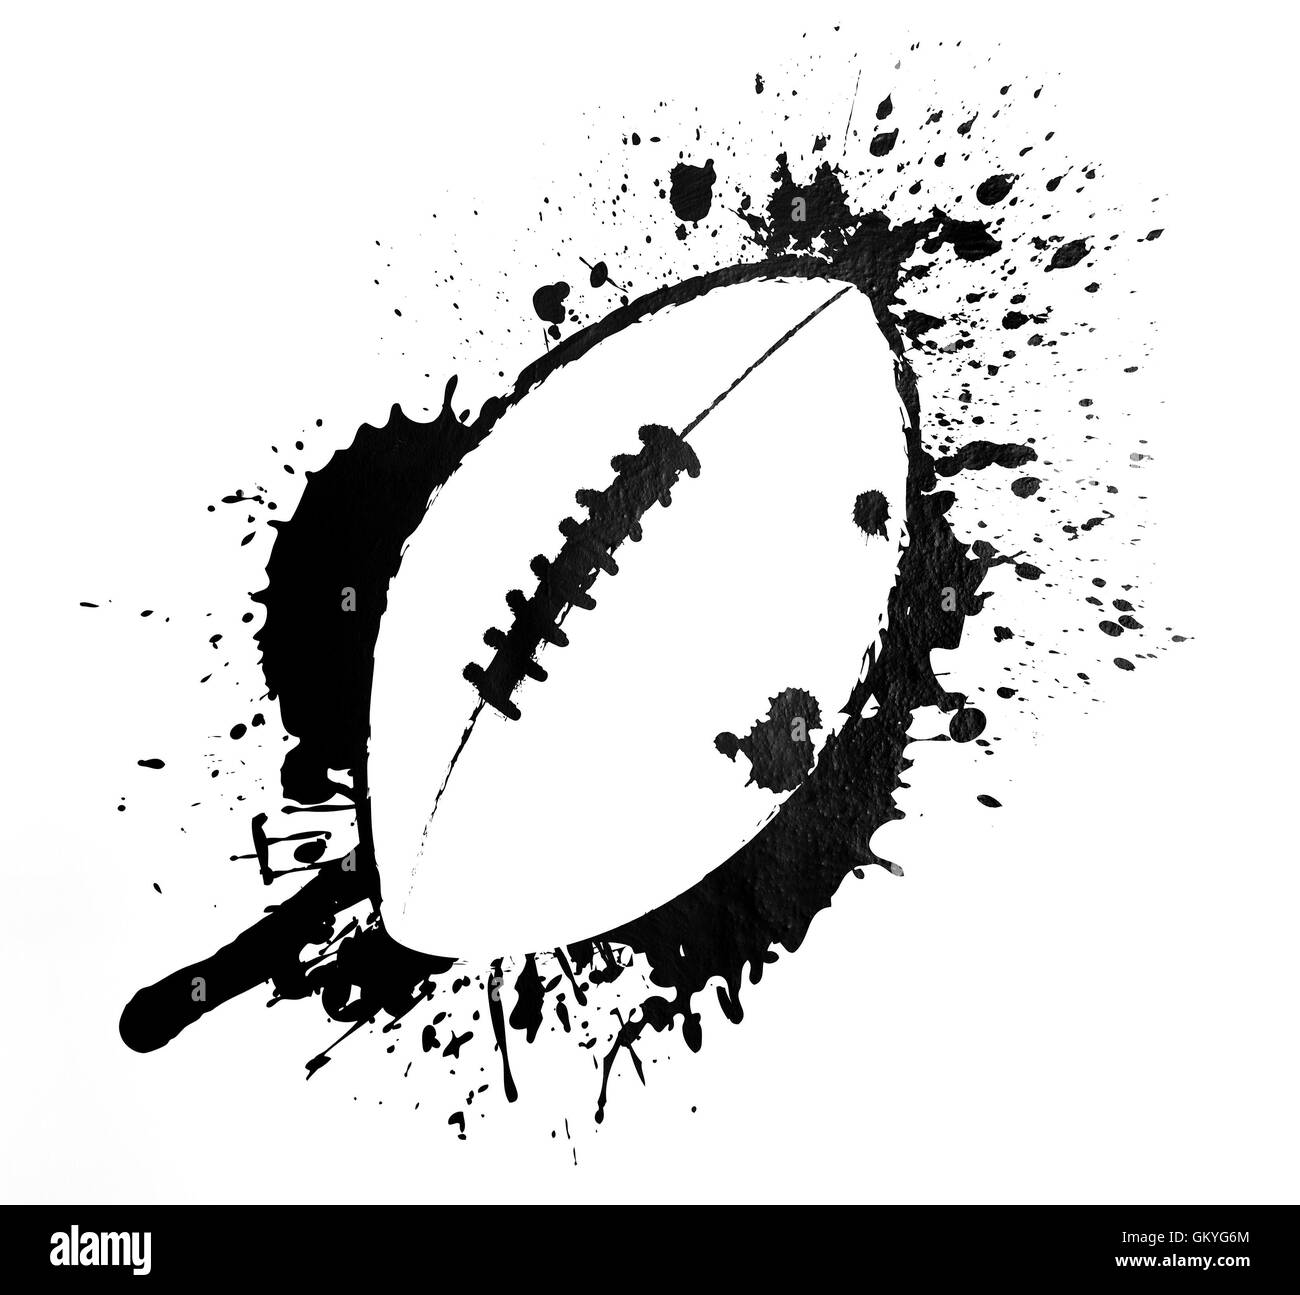 Black and white modern football sign with a doodle sketch ball on a painted splash or splatter effect background Stock Photo